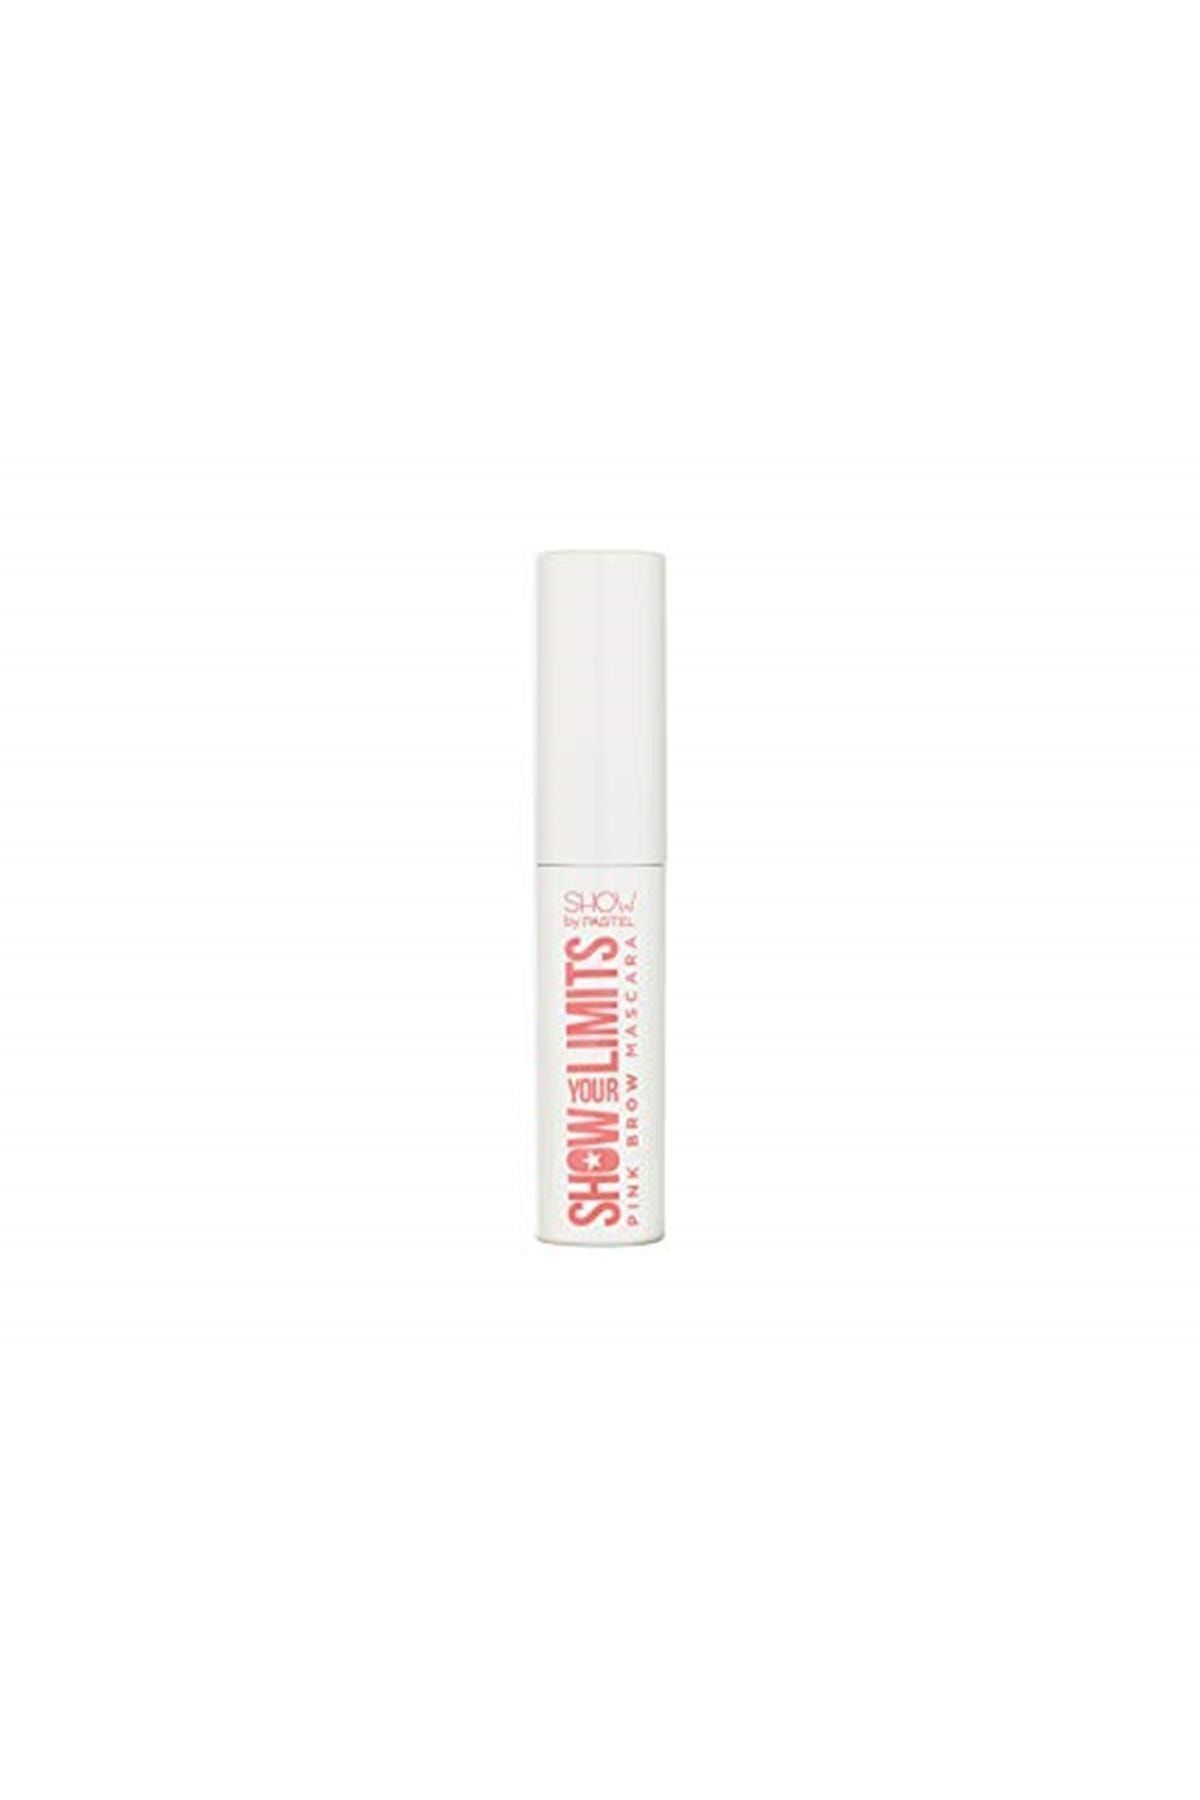 Show by Pastel Show Your Limits Pınk Brow Mascara 11 4 2 ml